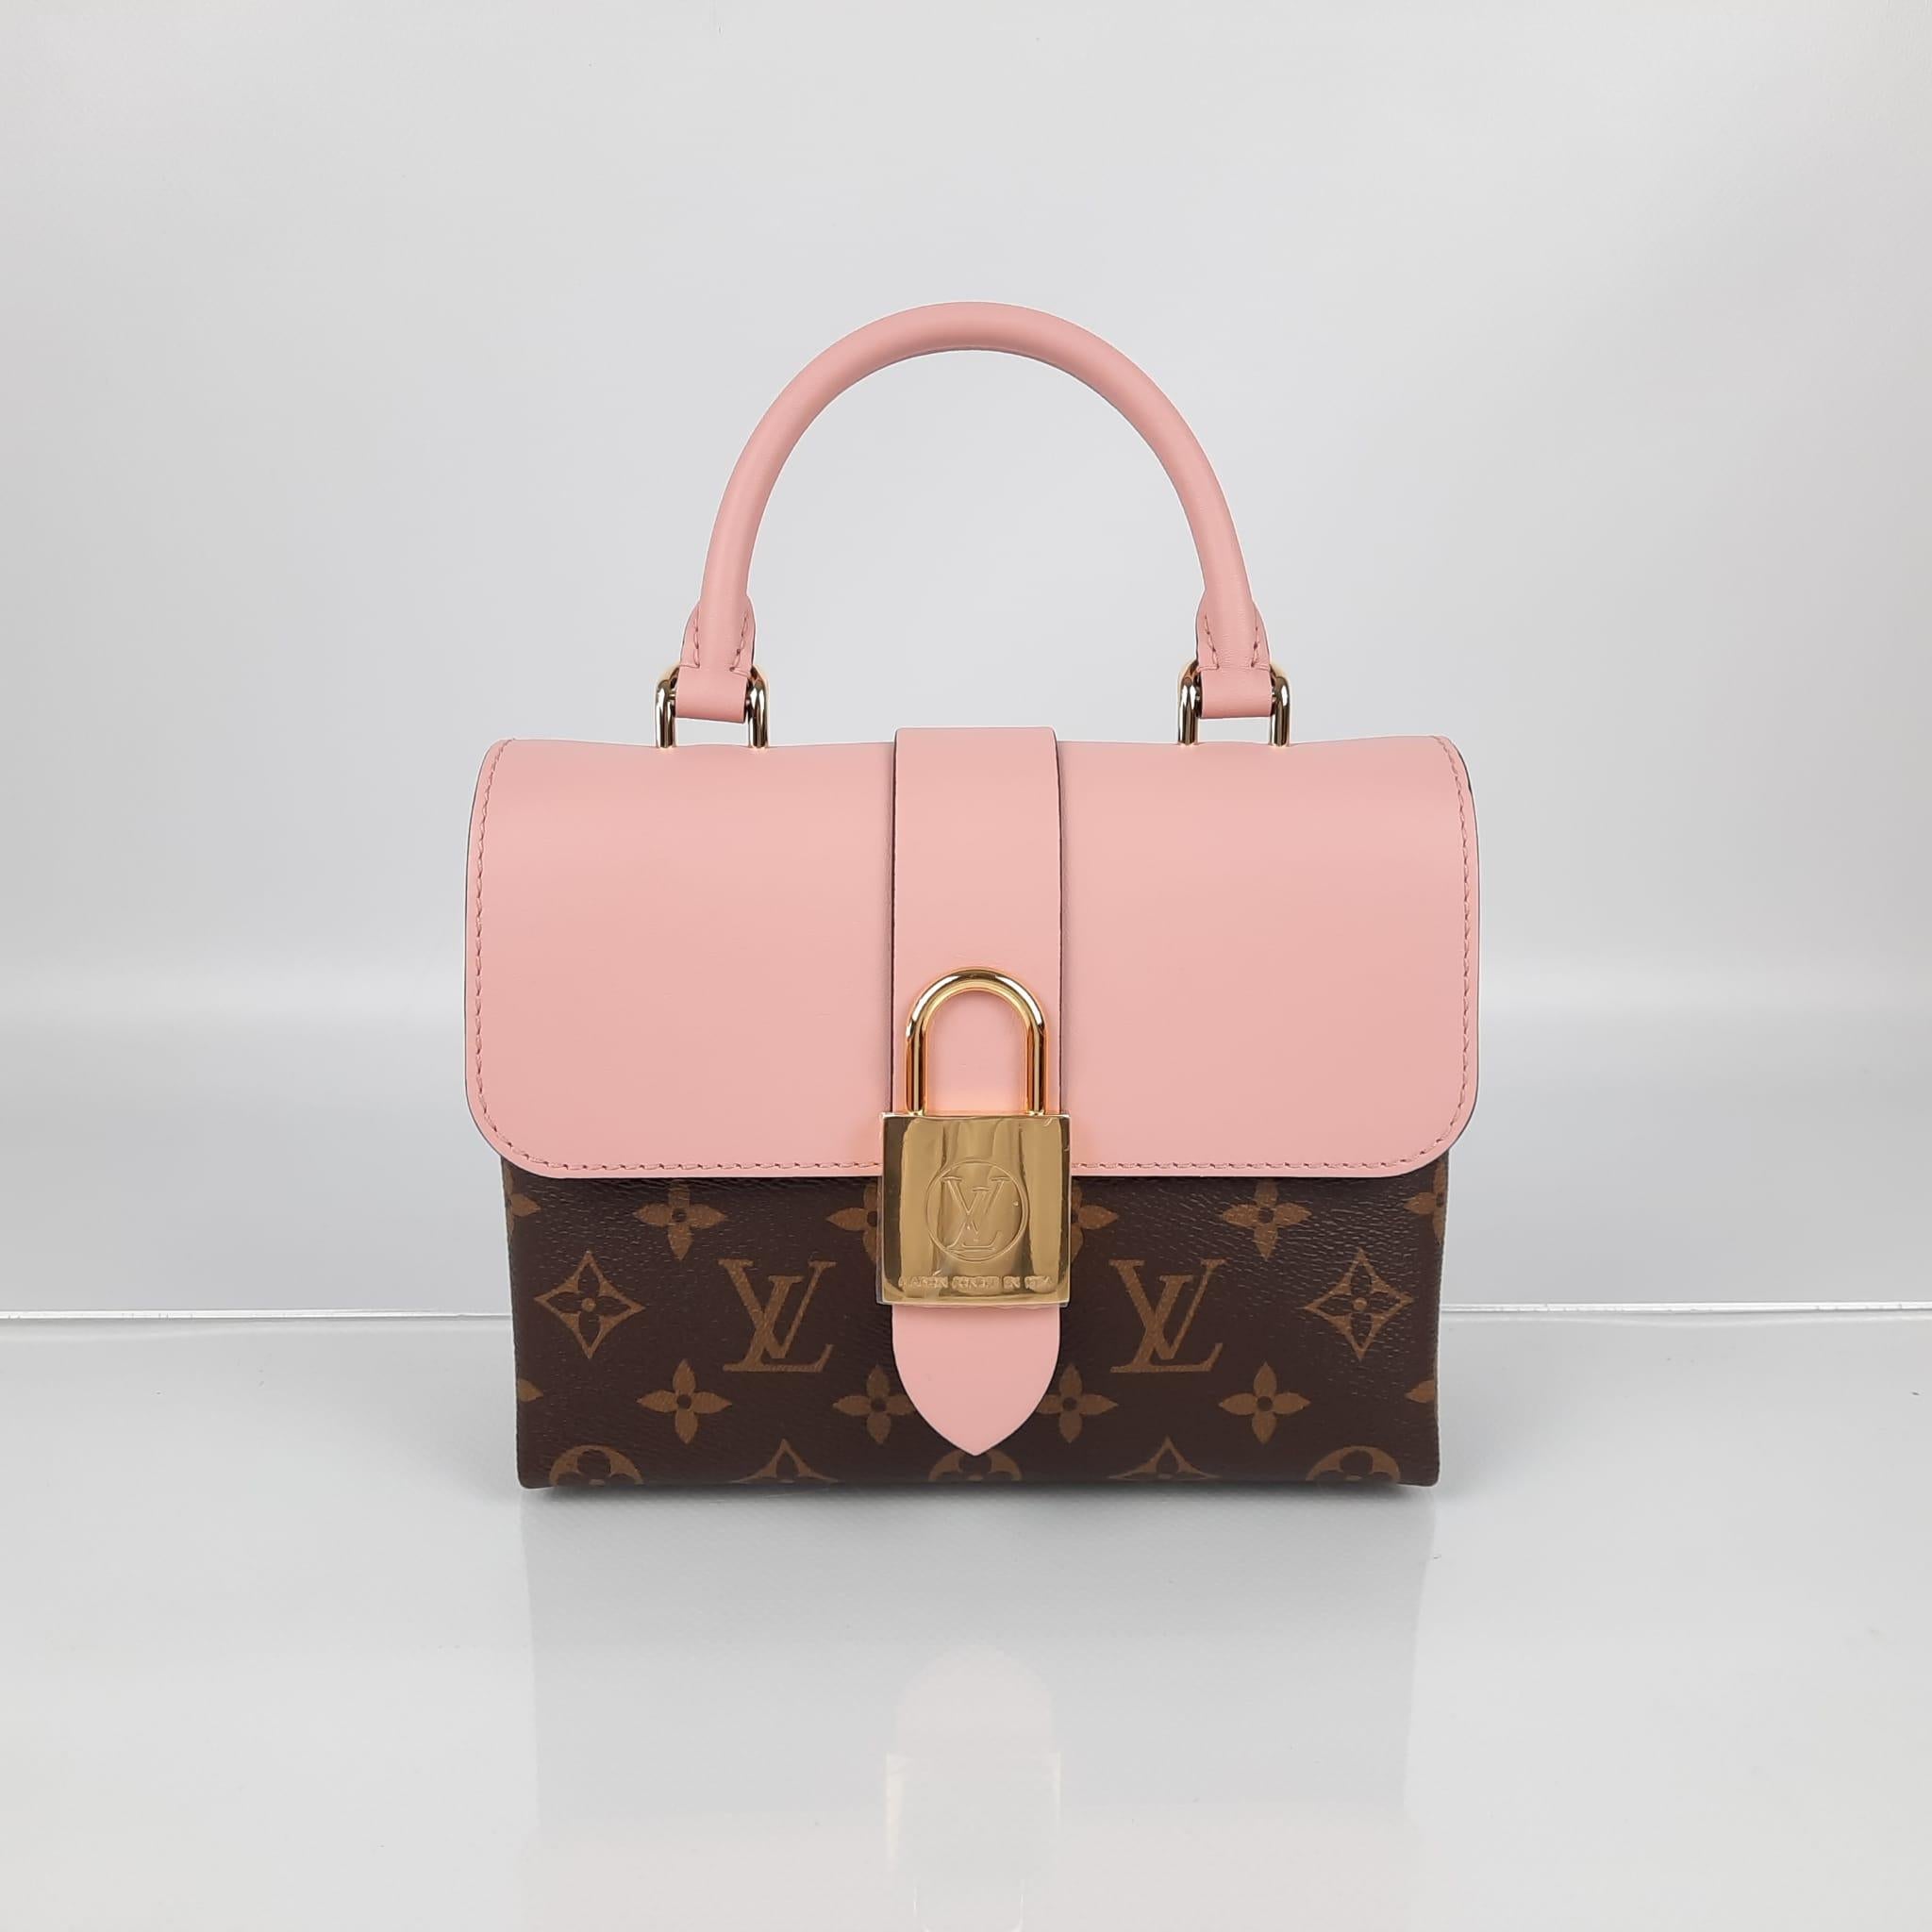  The Locky BB bag with a rigid structure is made of monogram canvas and cowhide, and it shows off an oversize metallic LV padlock closure in gold, which adds elegance and originality to the design. It is perfect to wear both during the day and at